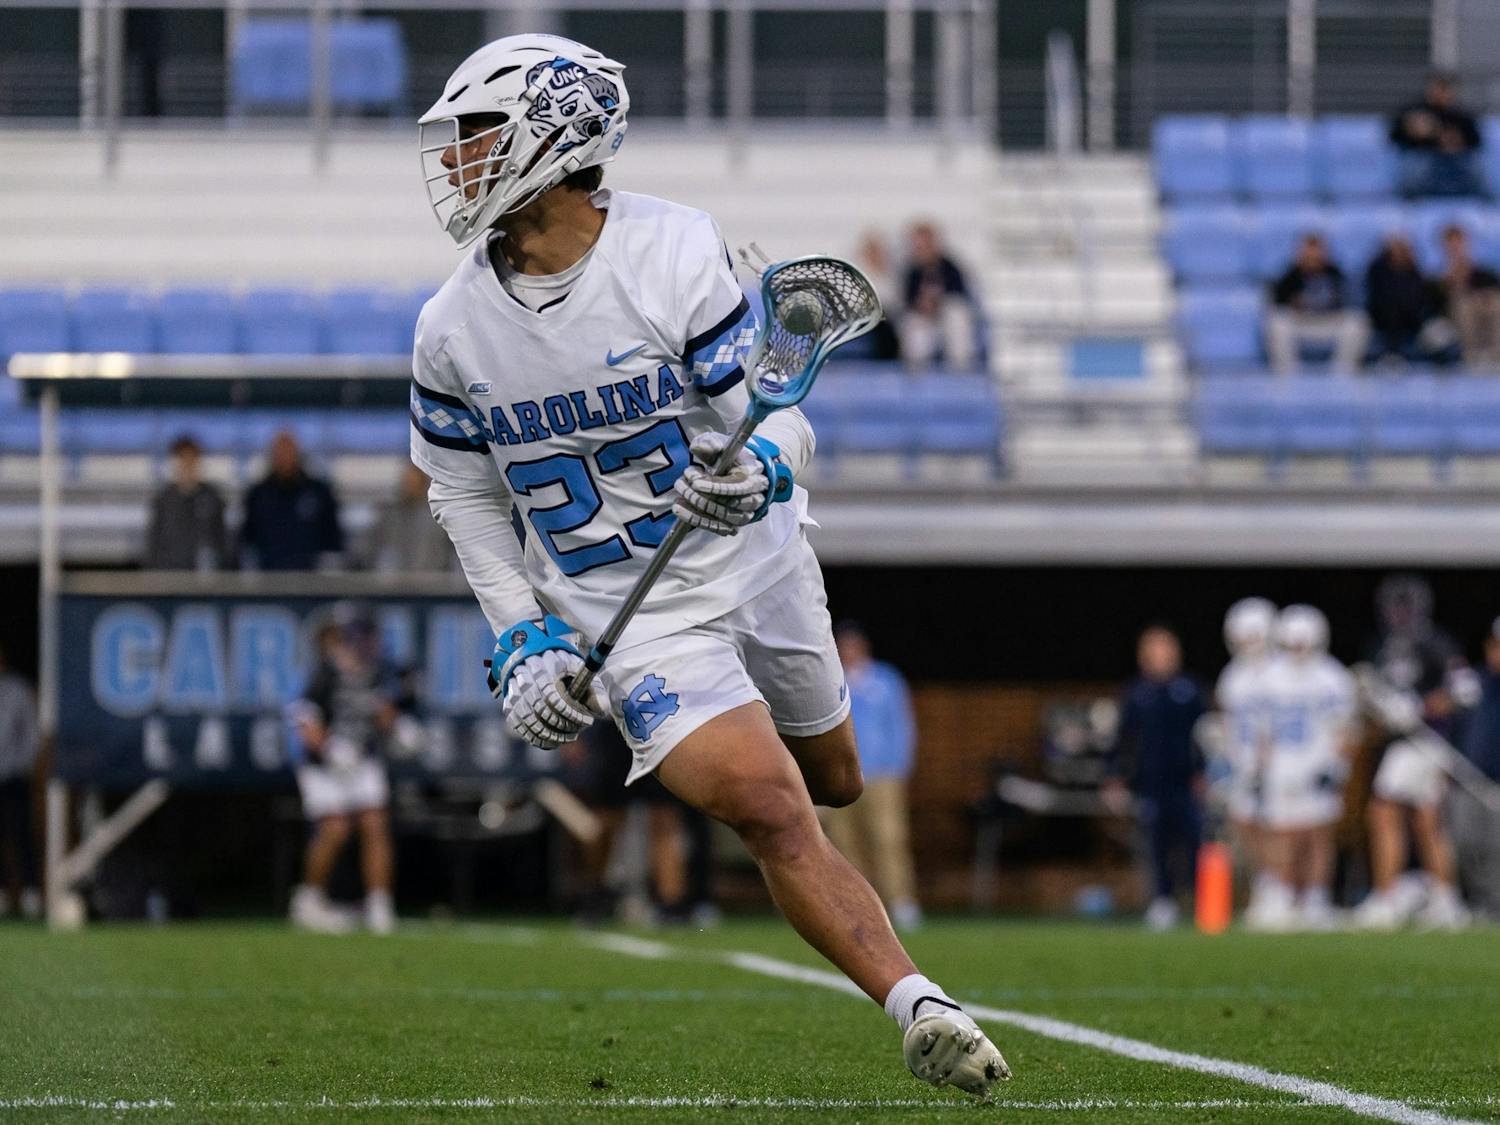 UNC sophomore midfielder Ty English (23) runs with the ball during the men's lacrosse game against High Point on Wednesday, March 22, 2023, at Dorrance Field. UNC beat High Point 16-9.